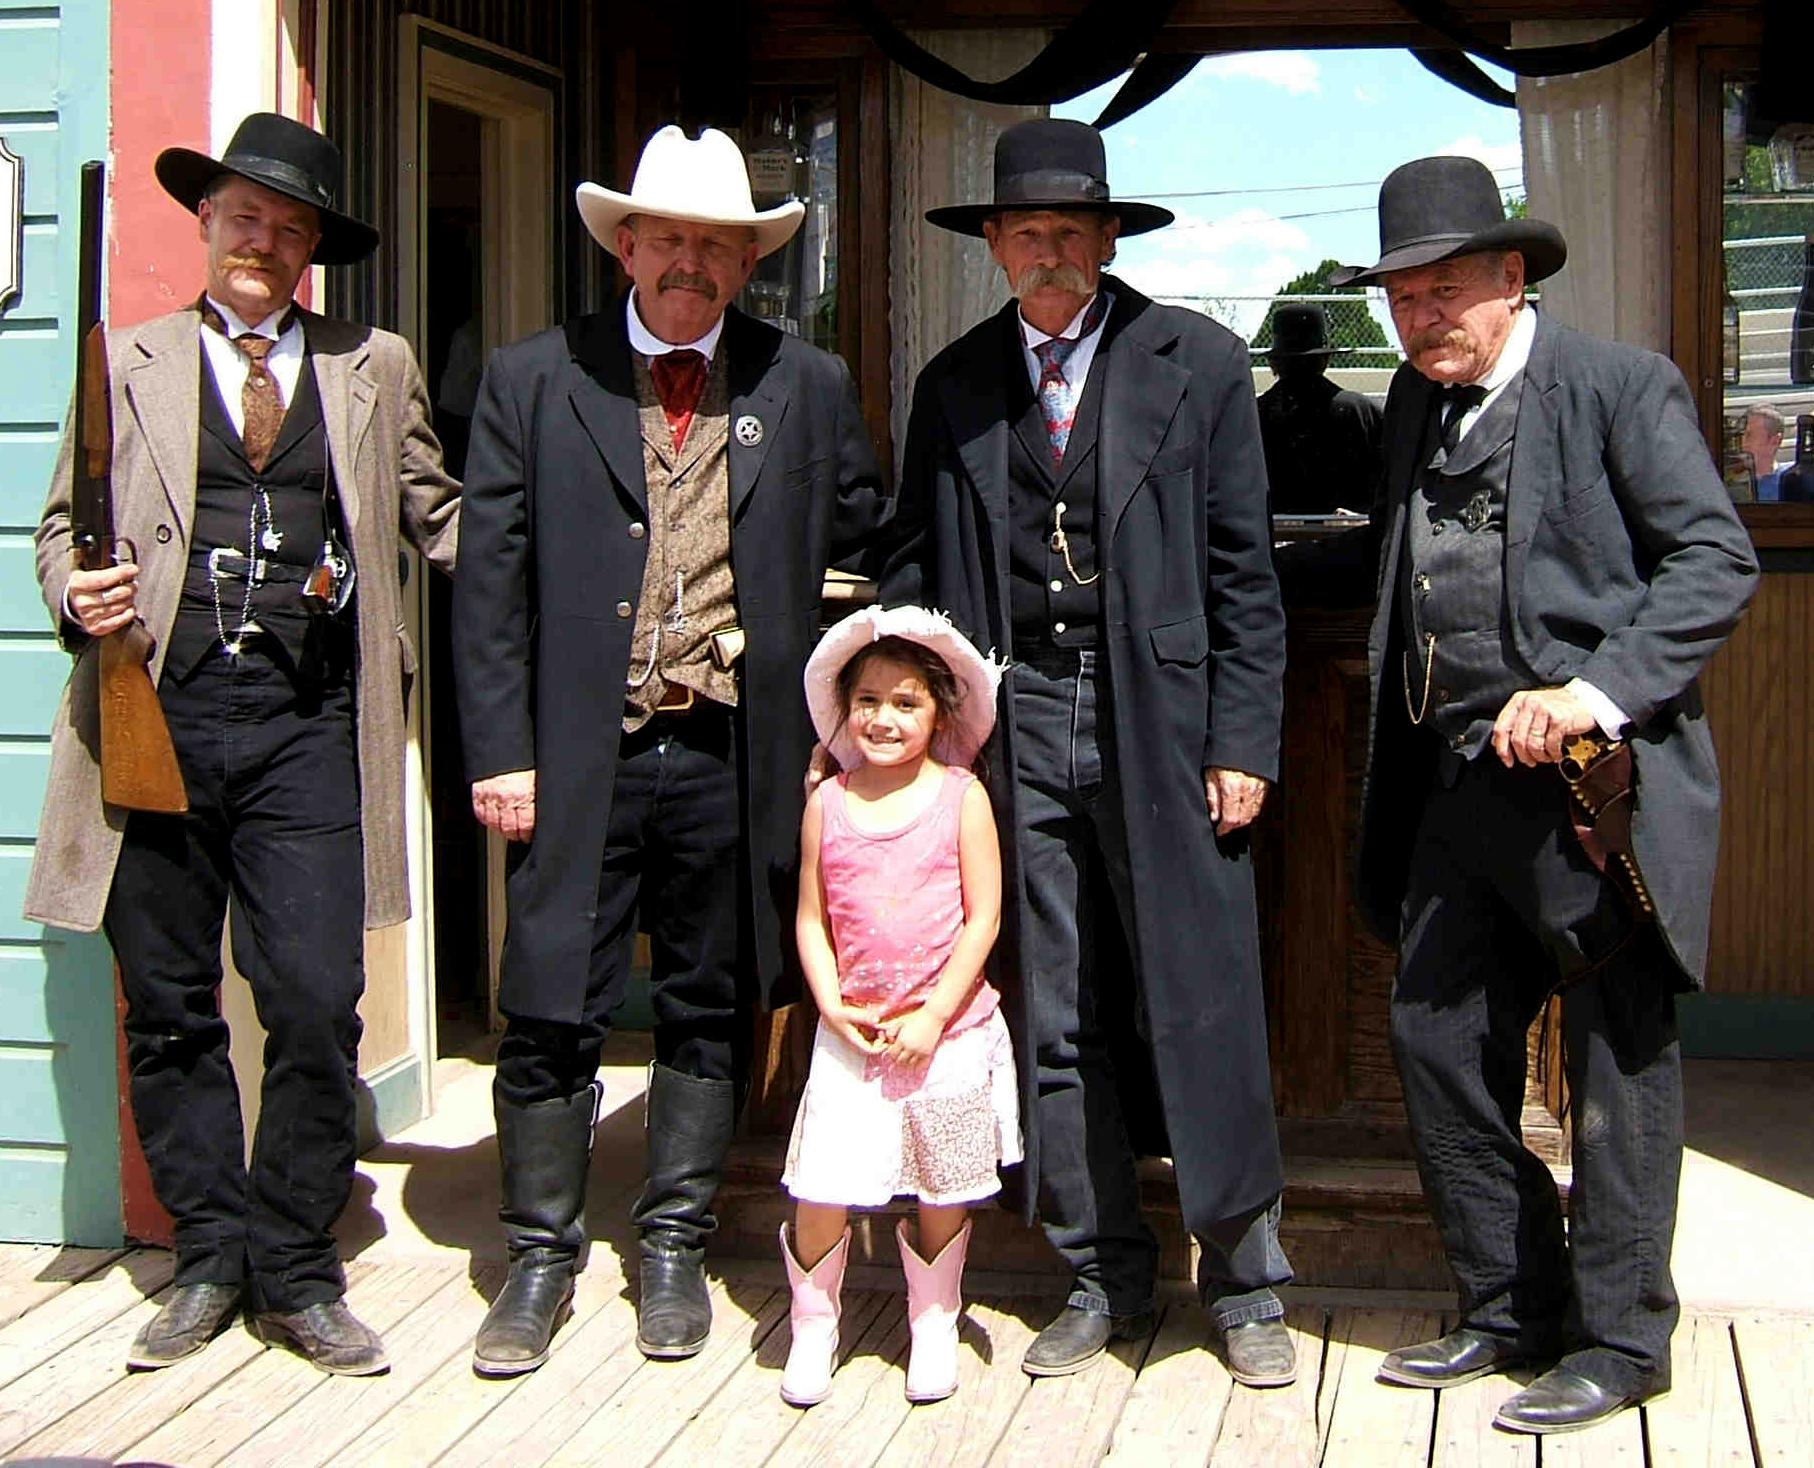 After the shootout at the O.K. Corral, get your photo taken with Wyatt Earp and the rest of the gang. Photo courtesy O.K. Corral.